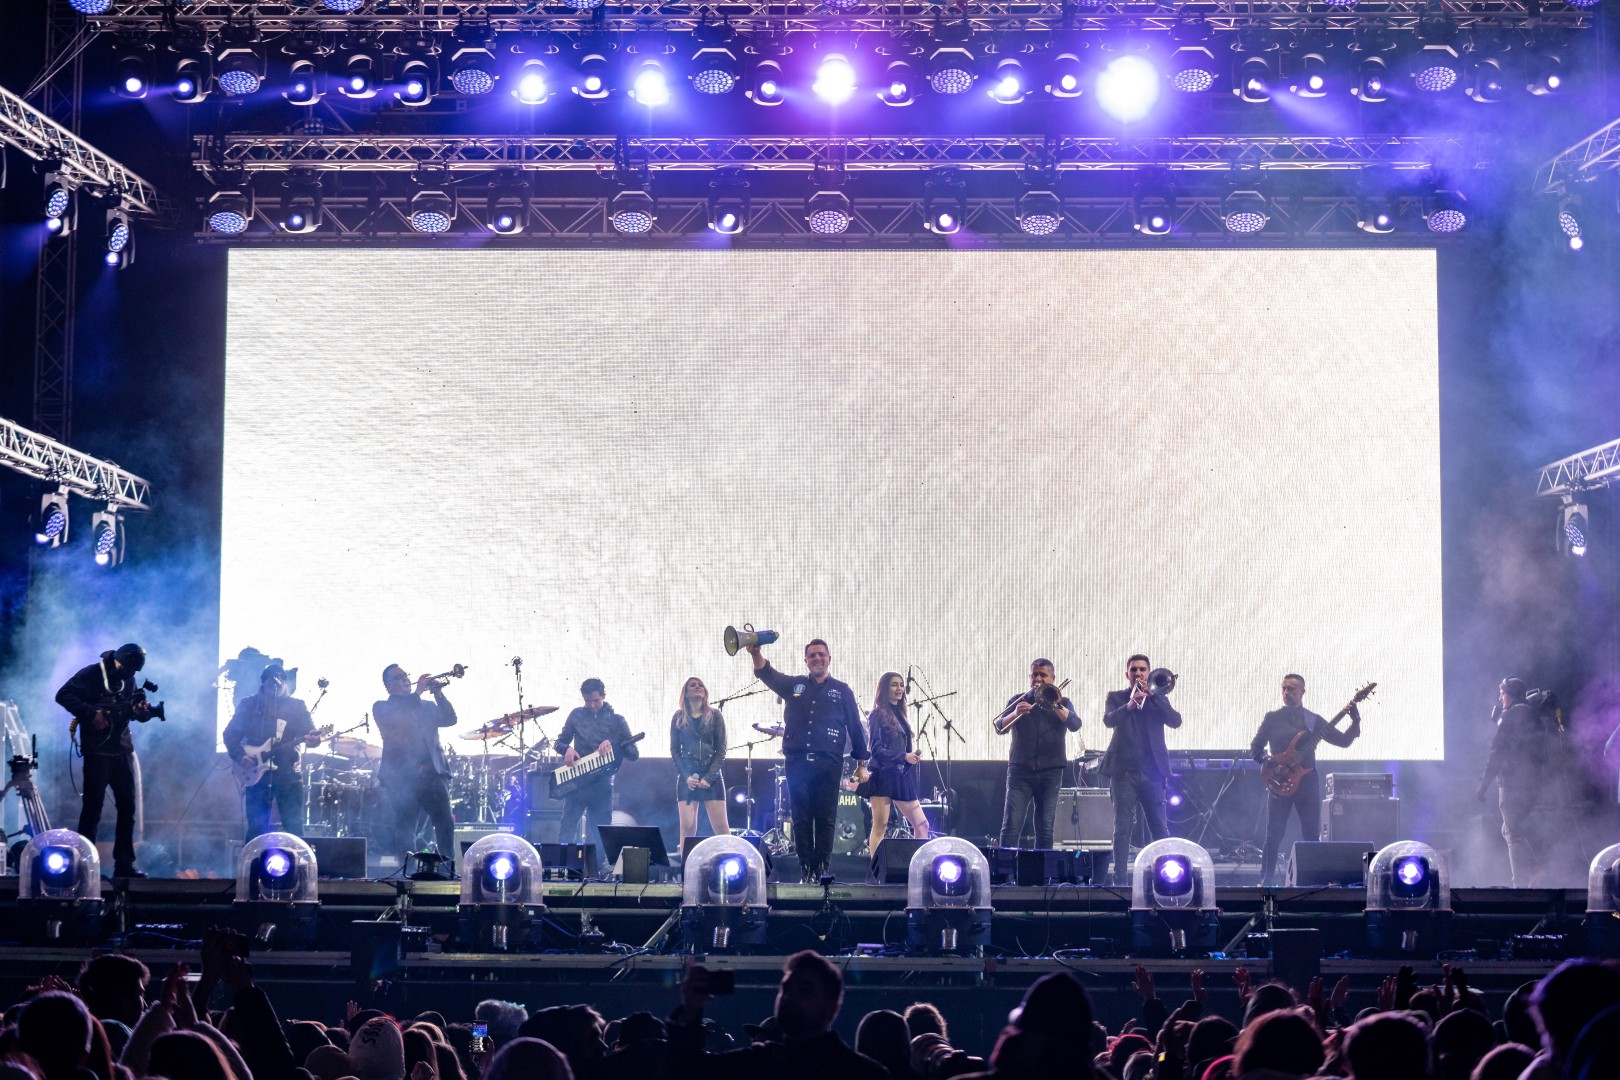 Horia Brenciu & HB Orchestra at National Arena in Bucharest on March 12, 2022 (88b12c40bc)